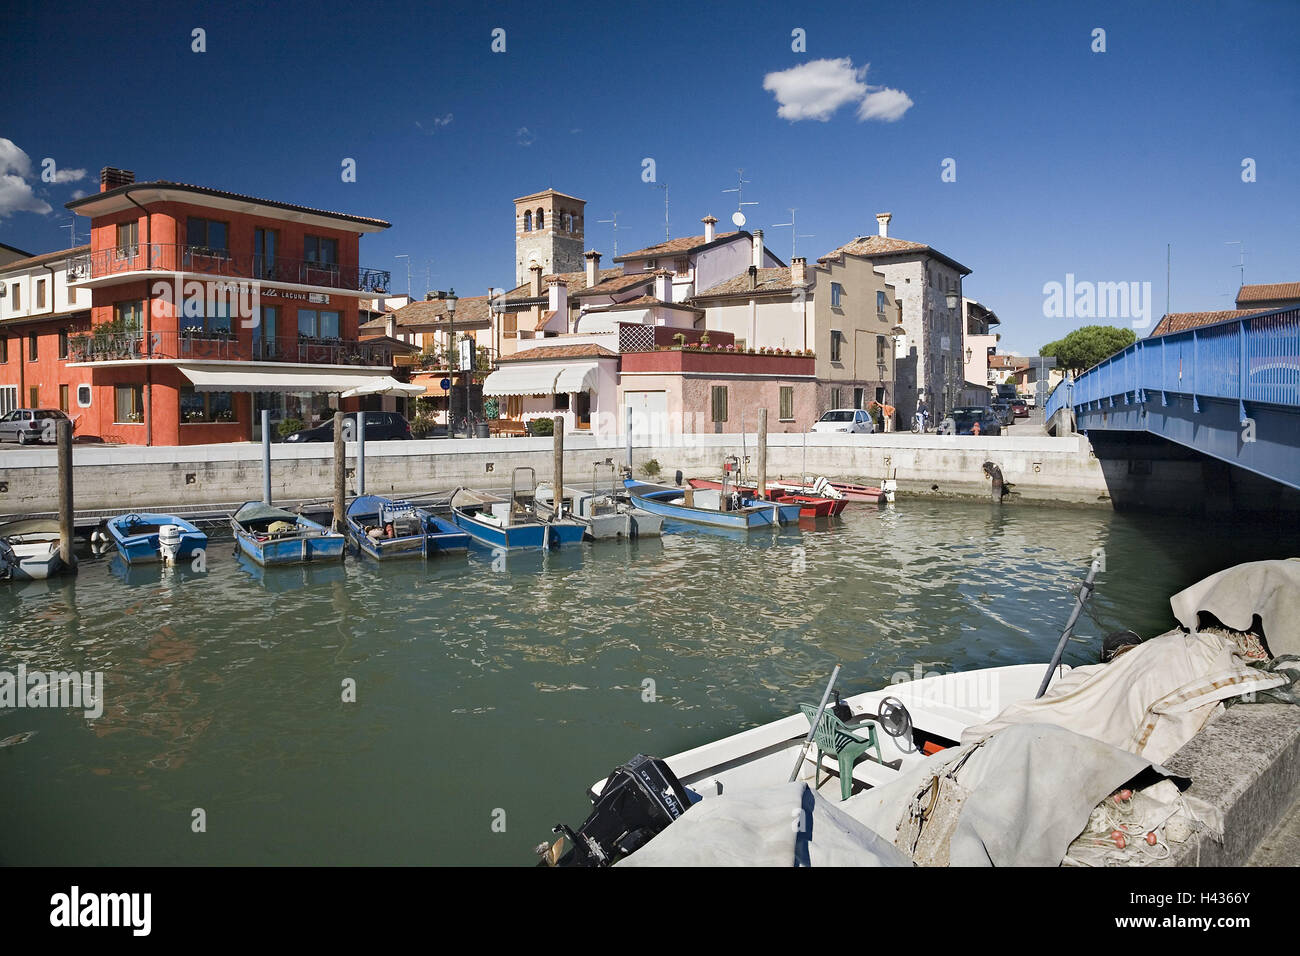 Italy, Marano Lagunare, town view, harbour, town, houses, buildings, harbour basins, fishing harbour, fishing boats, destination, tourism, Stock Photo